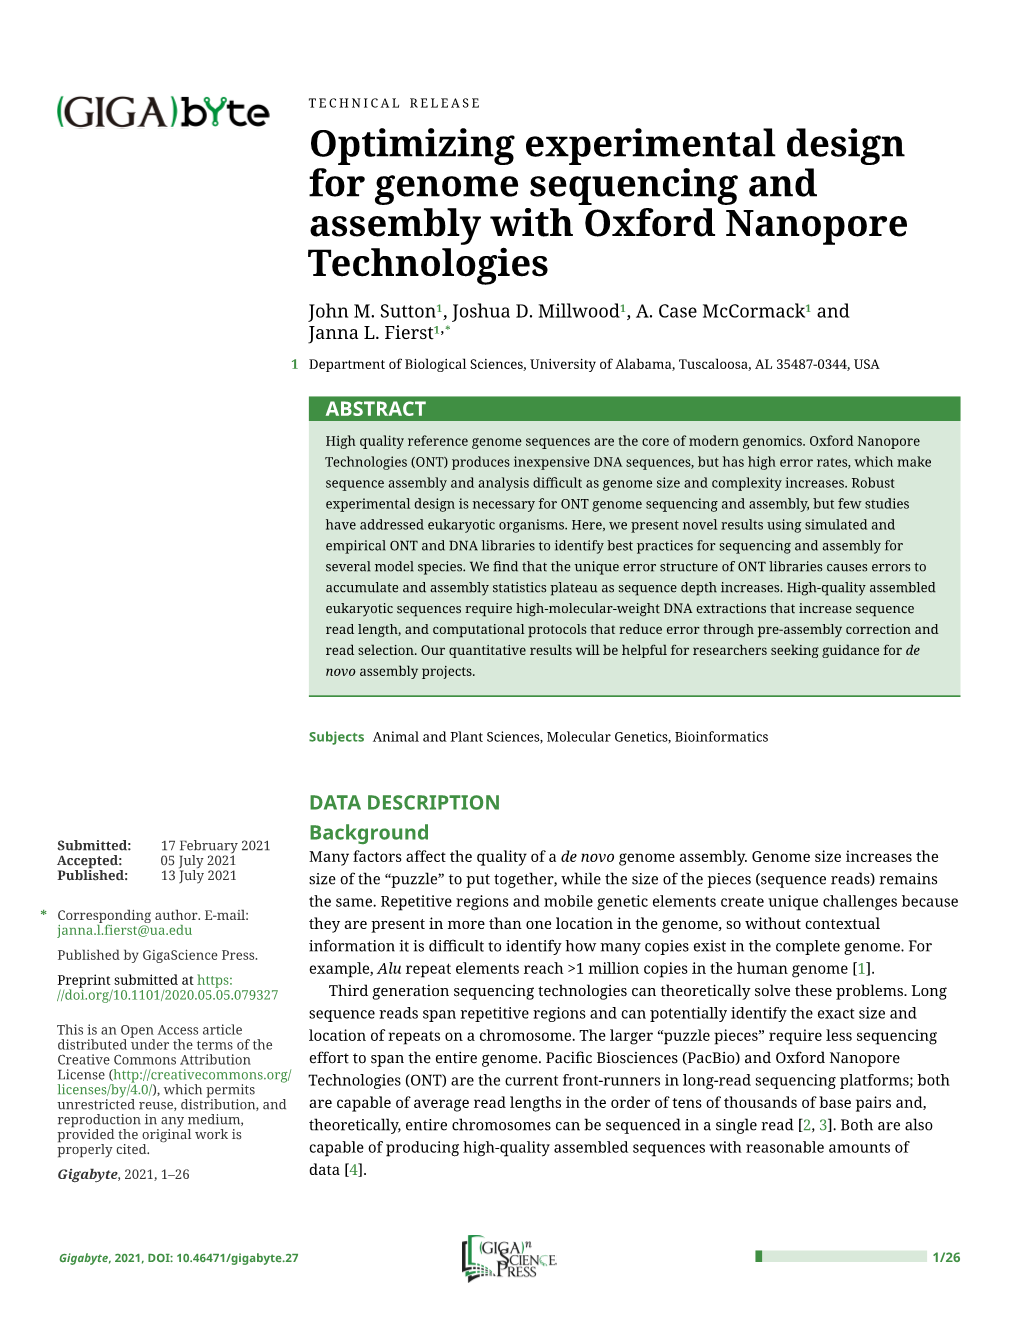 Optimizing Experimental Design for Genome Sequencing and Assembly with Oxford Nanopore Technologies John M